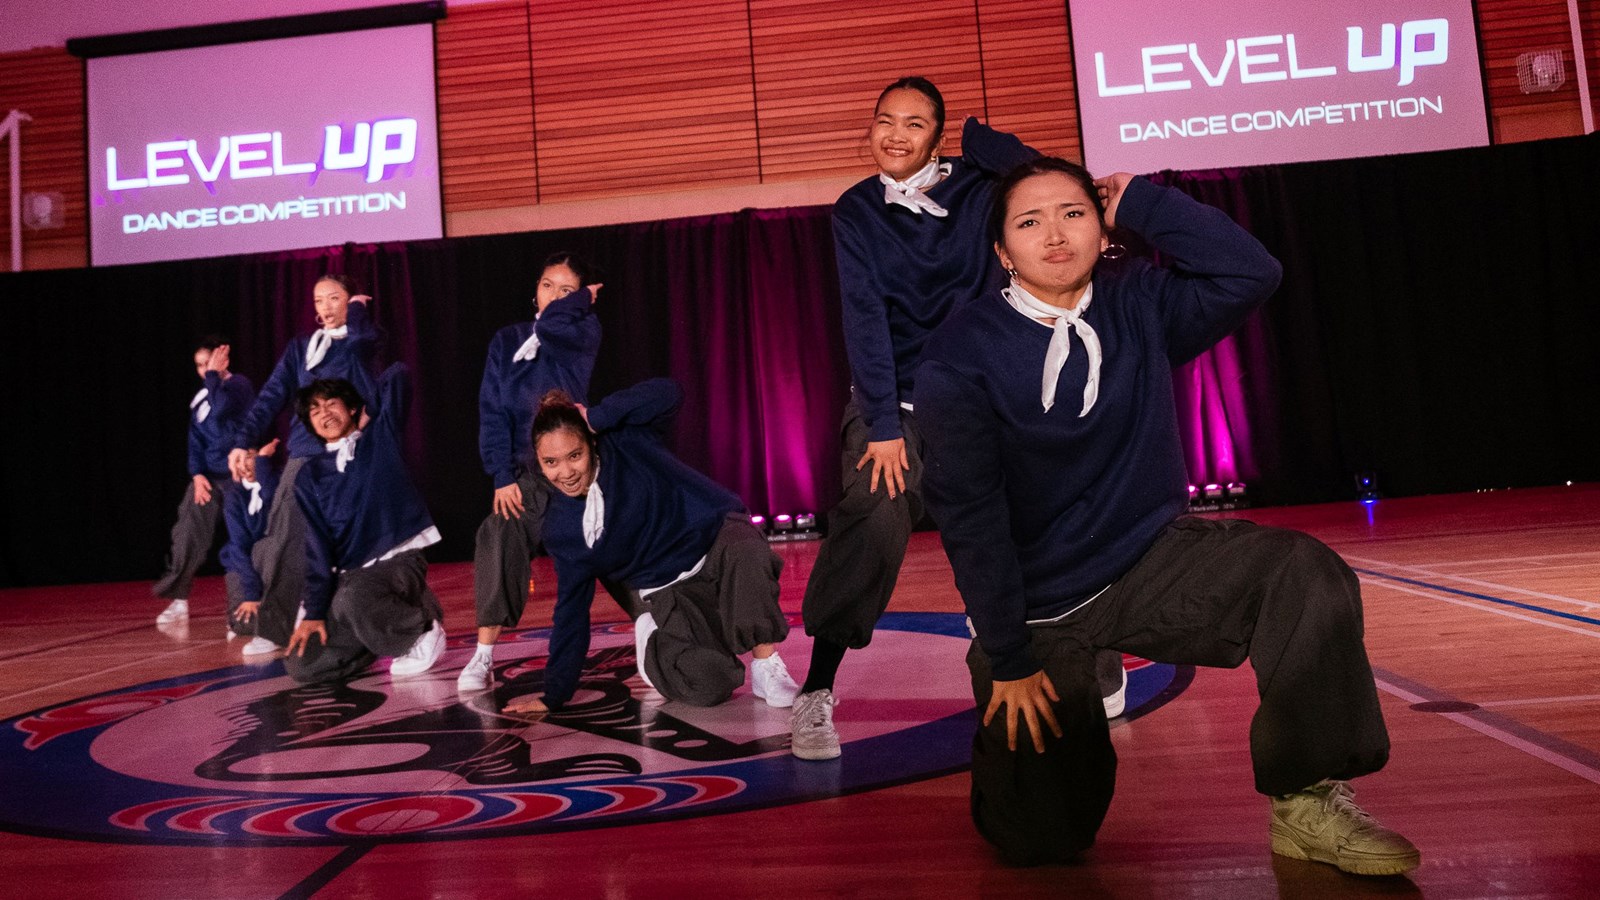 Surrey students win big at 3rd annual Level Up Dance Competition